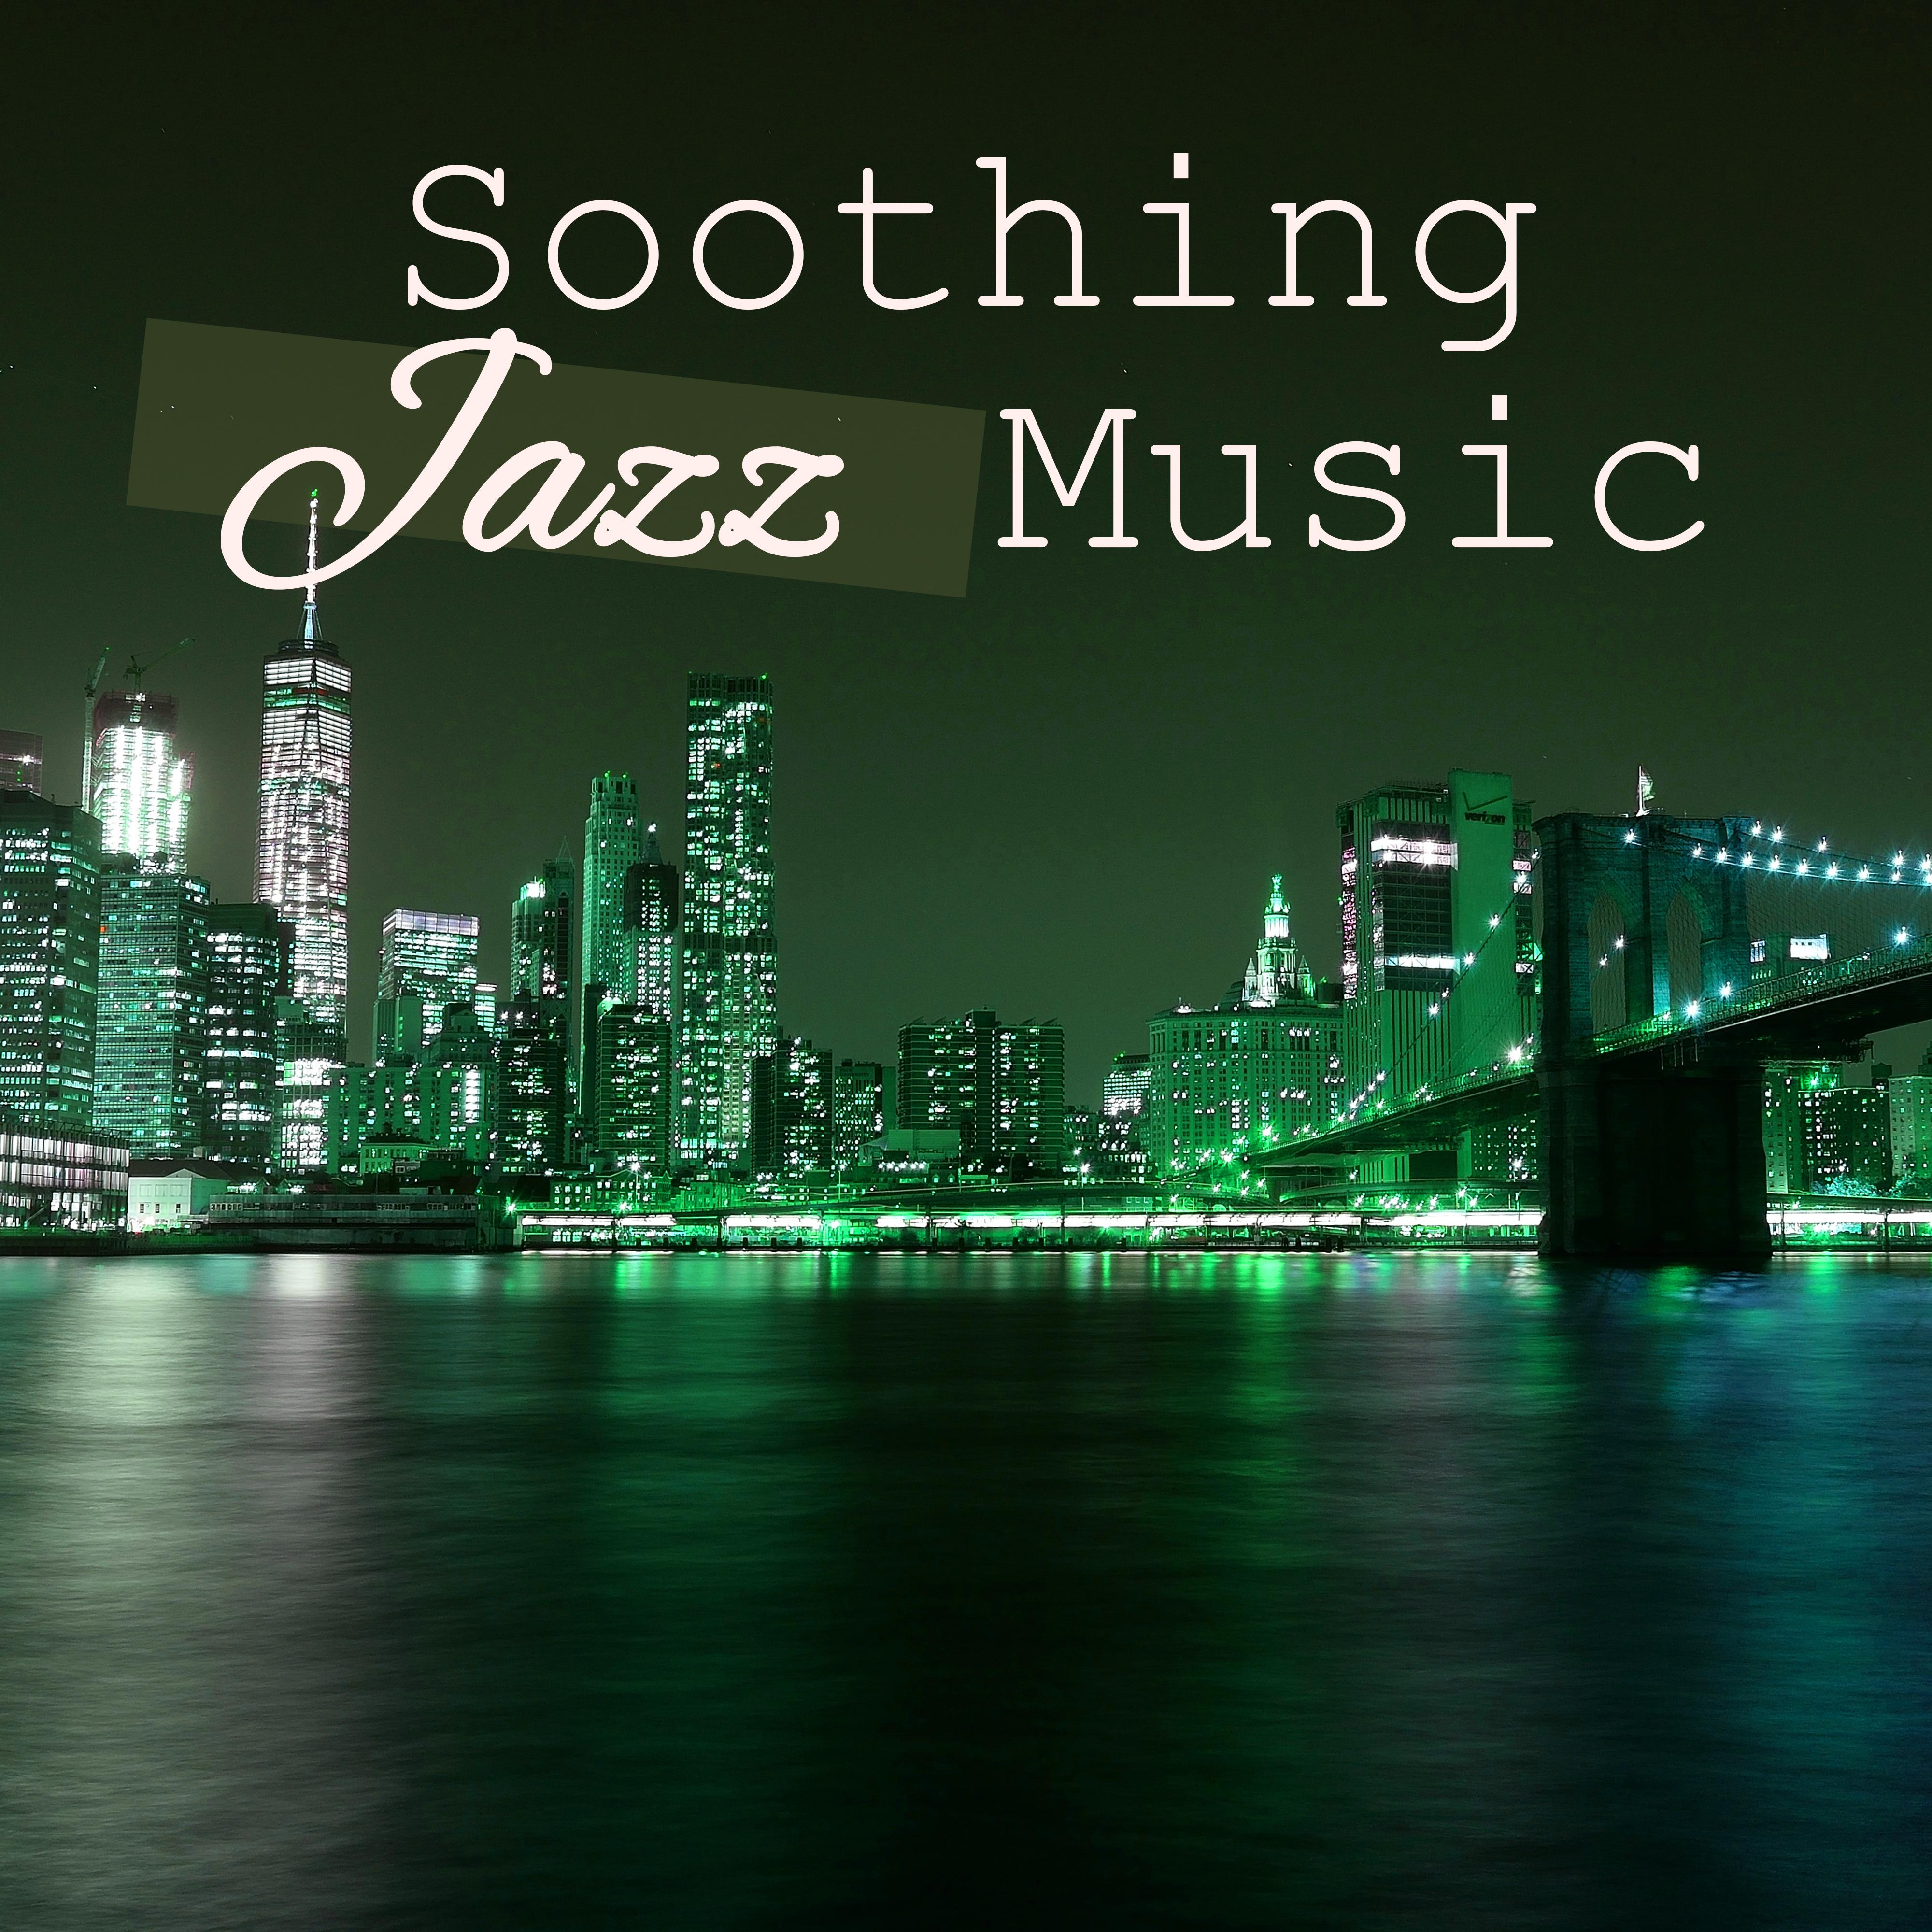 Soothing Jazz Music  Calming Sounds of Instrumental Music, Smooth Jazz Collection